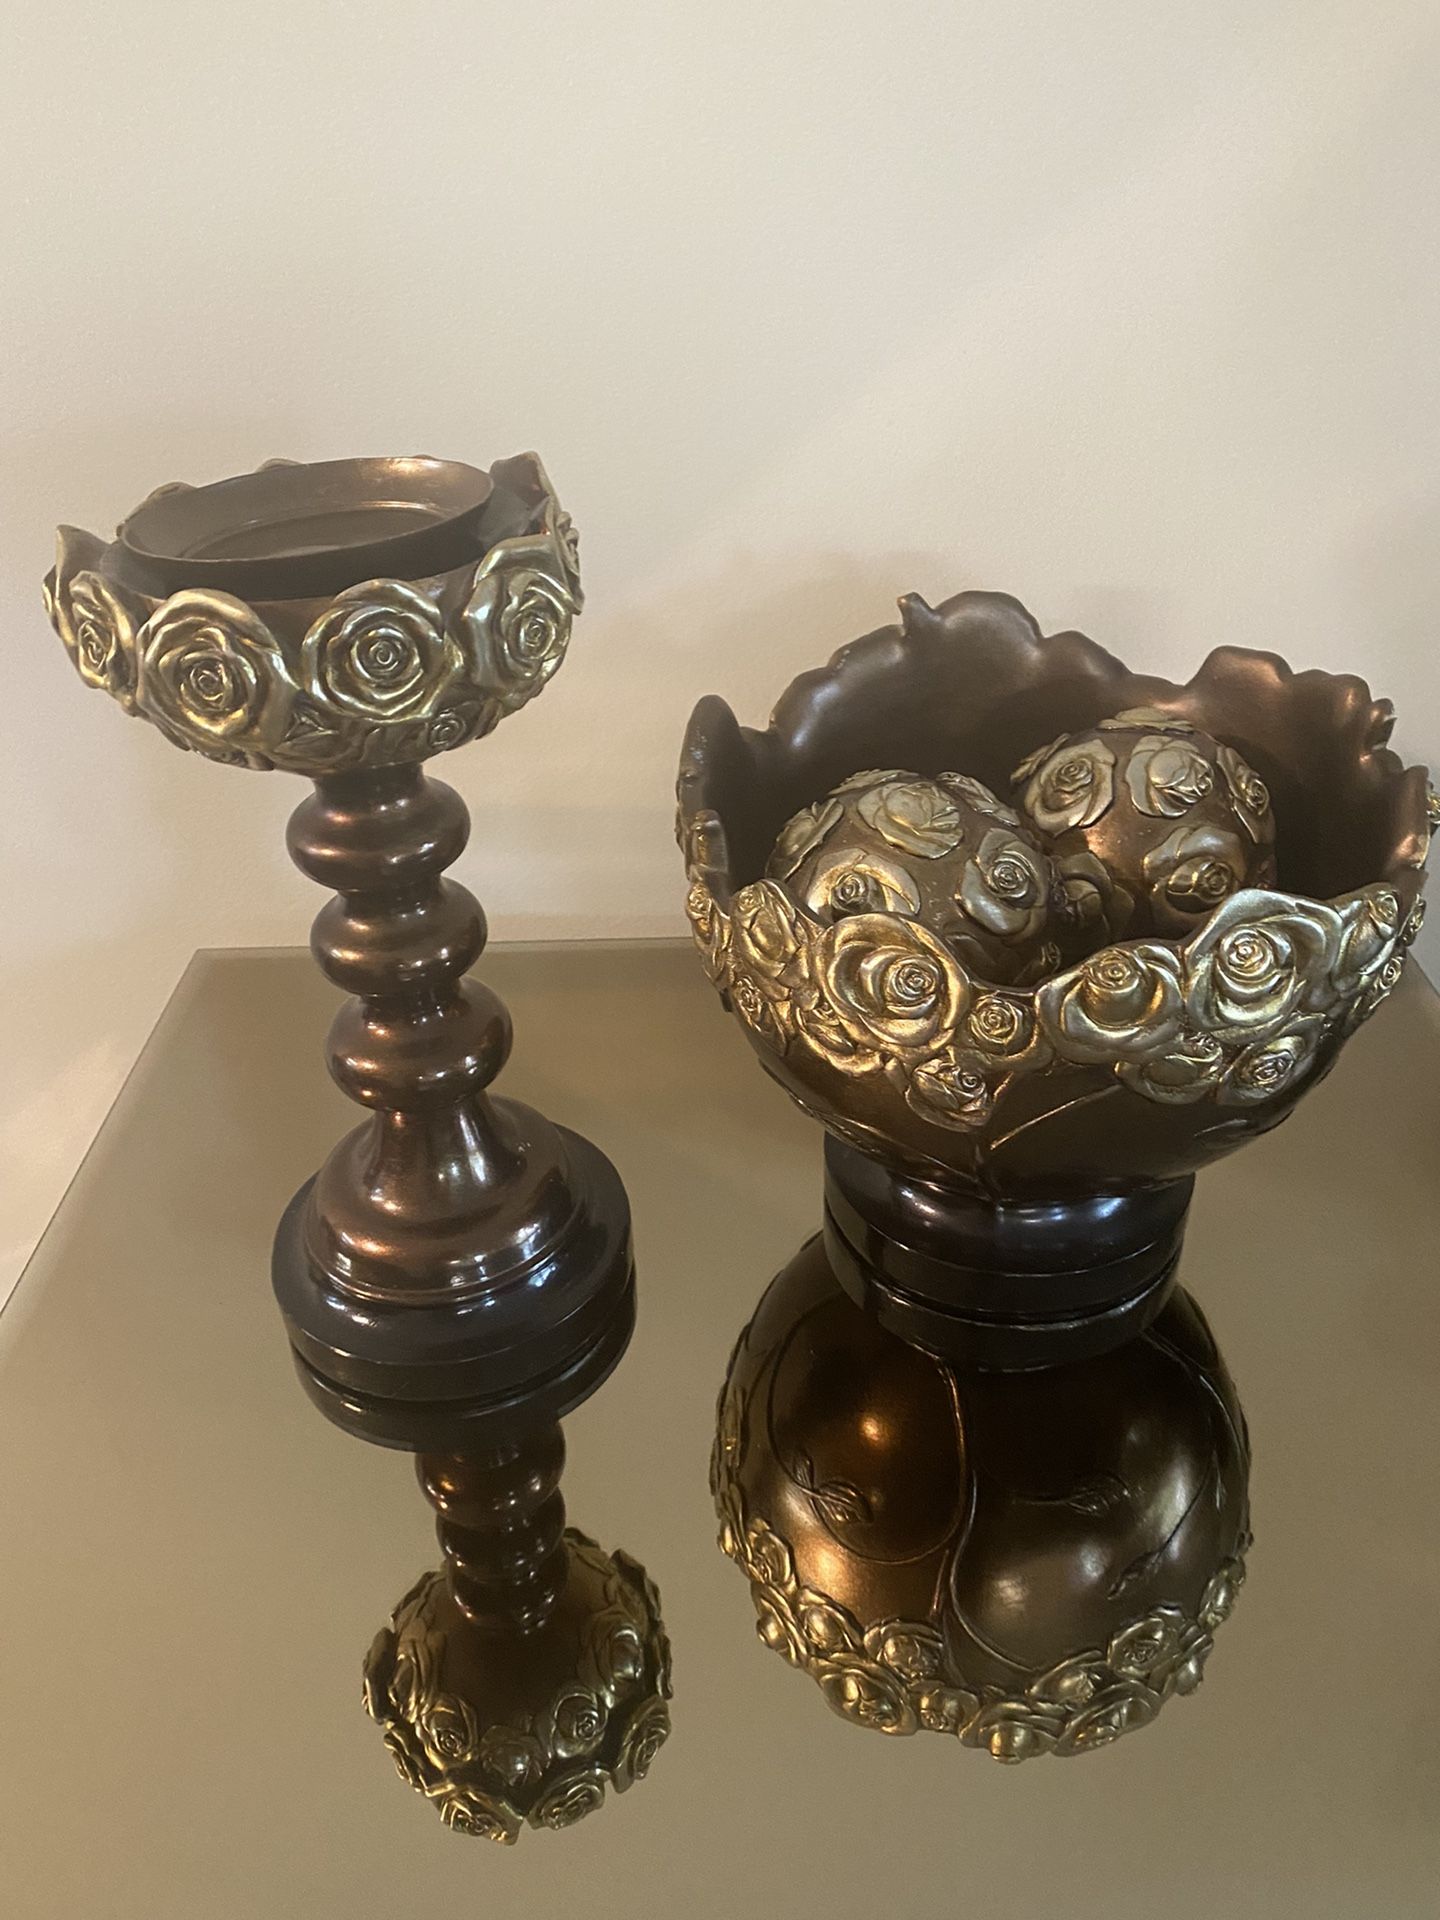 Candle Holder And Tray Whit Balls